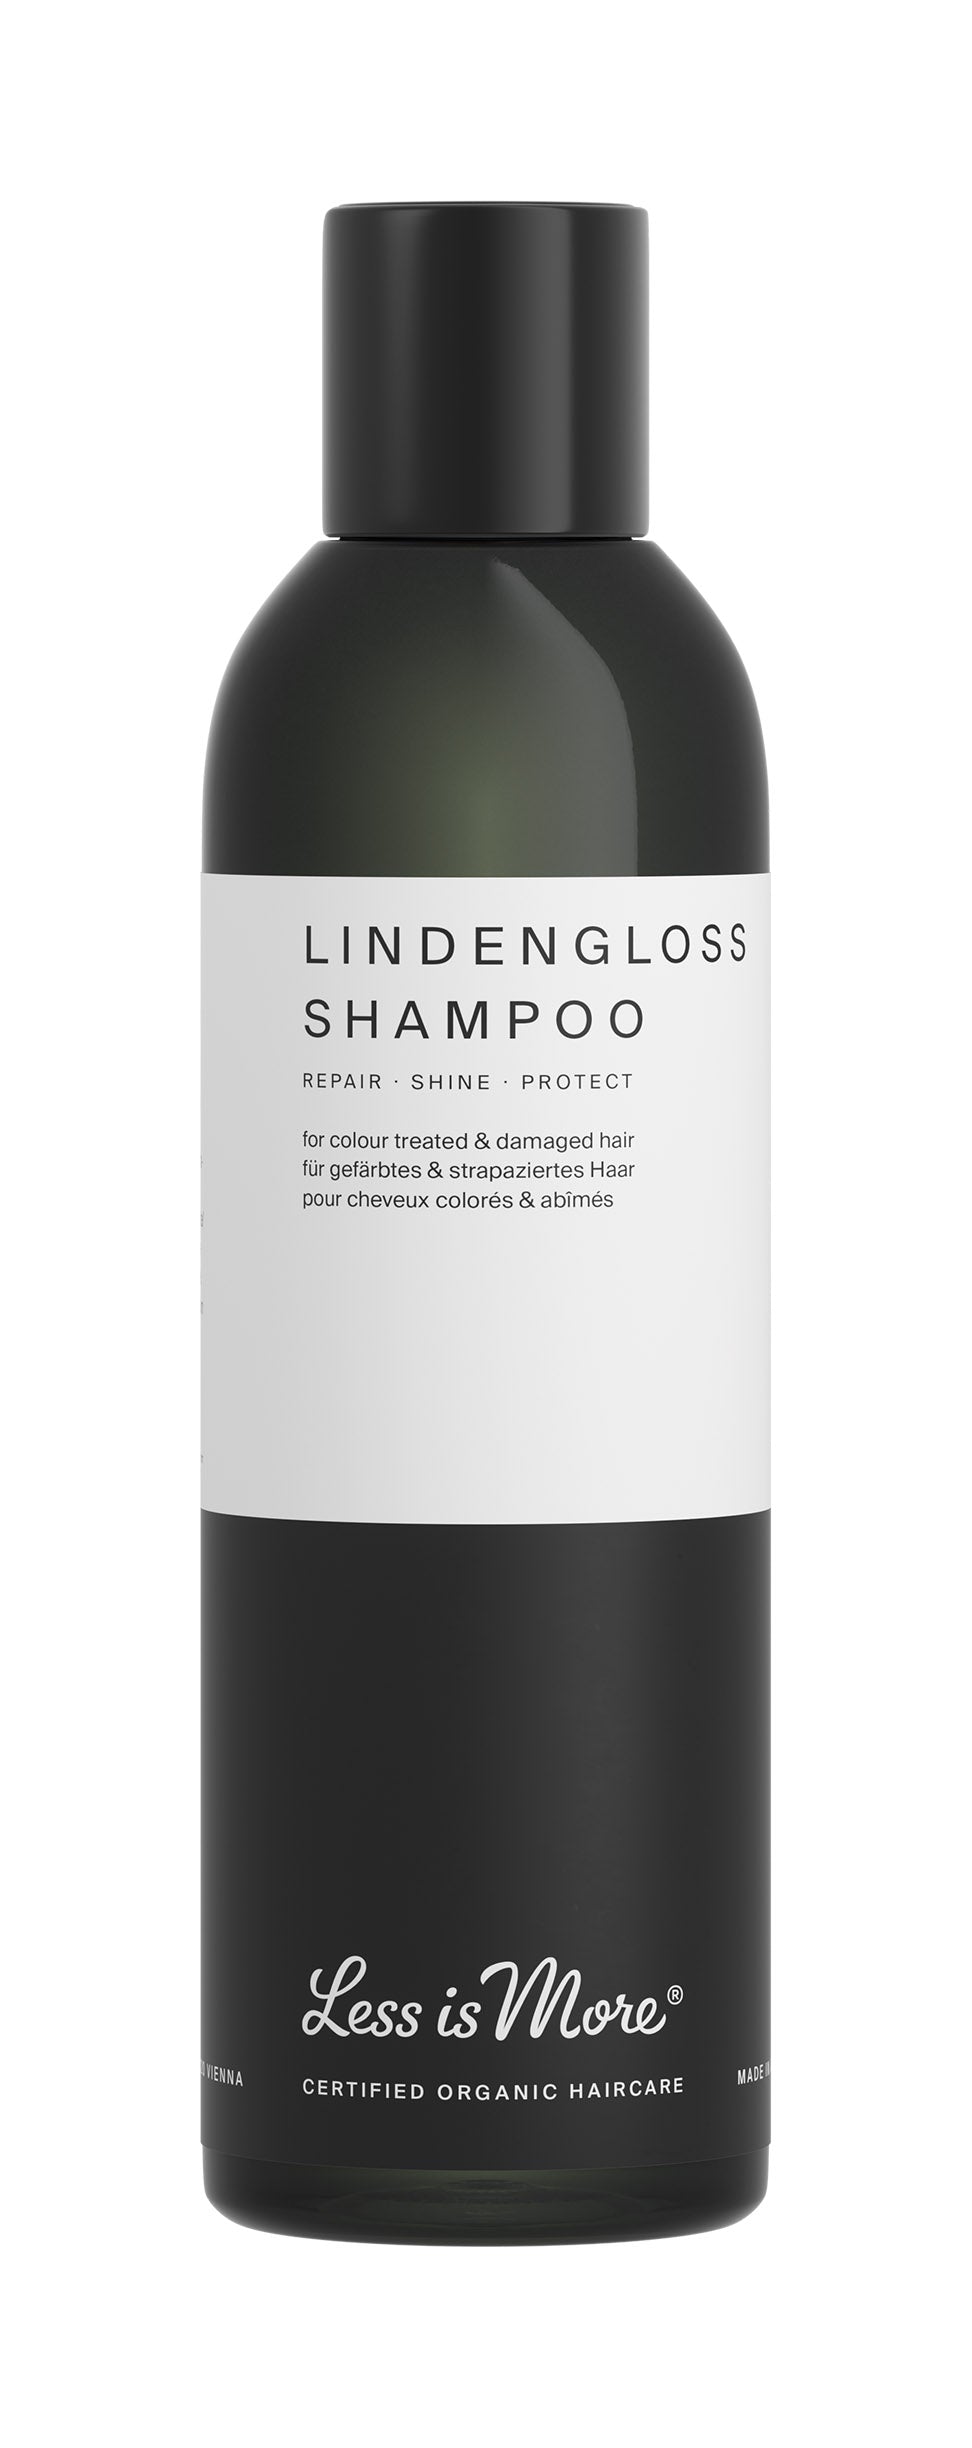 Less is More - Shampoo Lindengloss 200ml